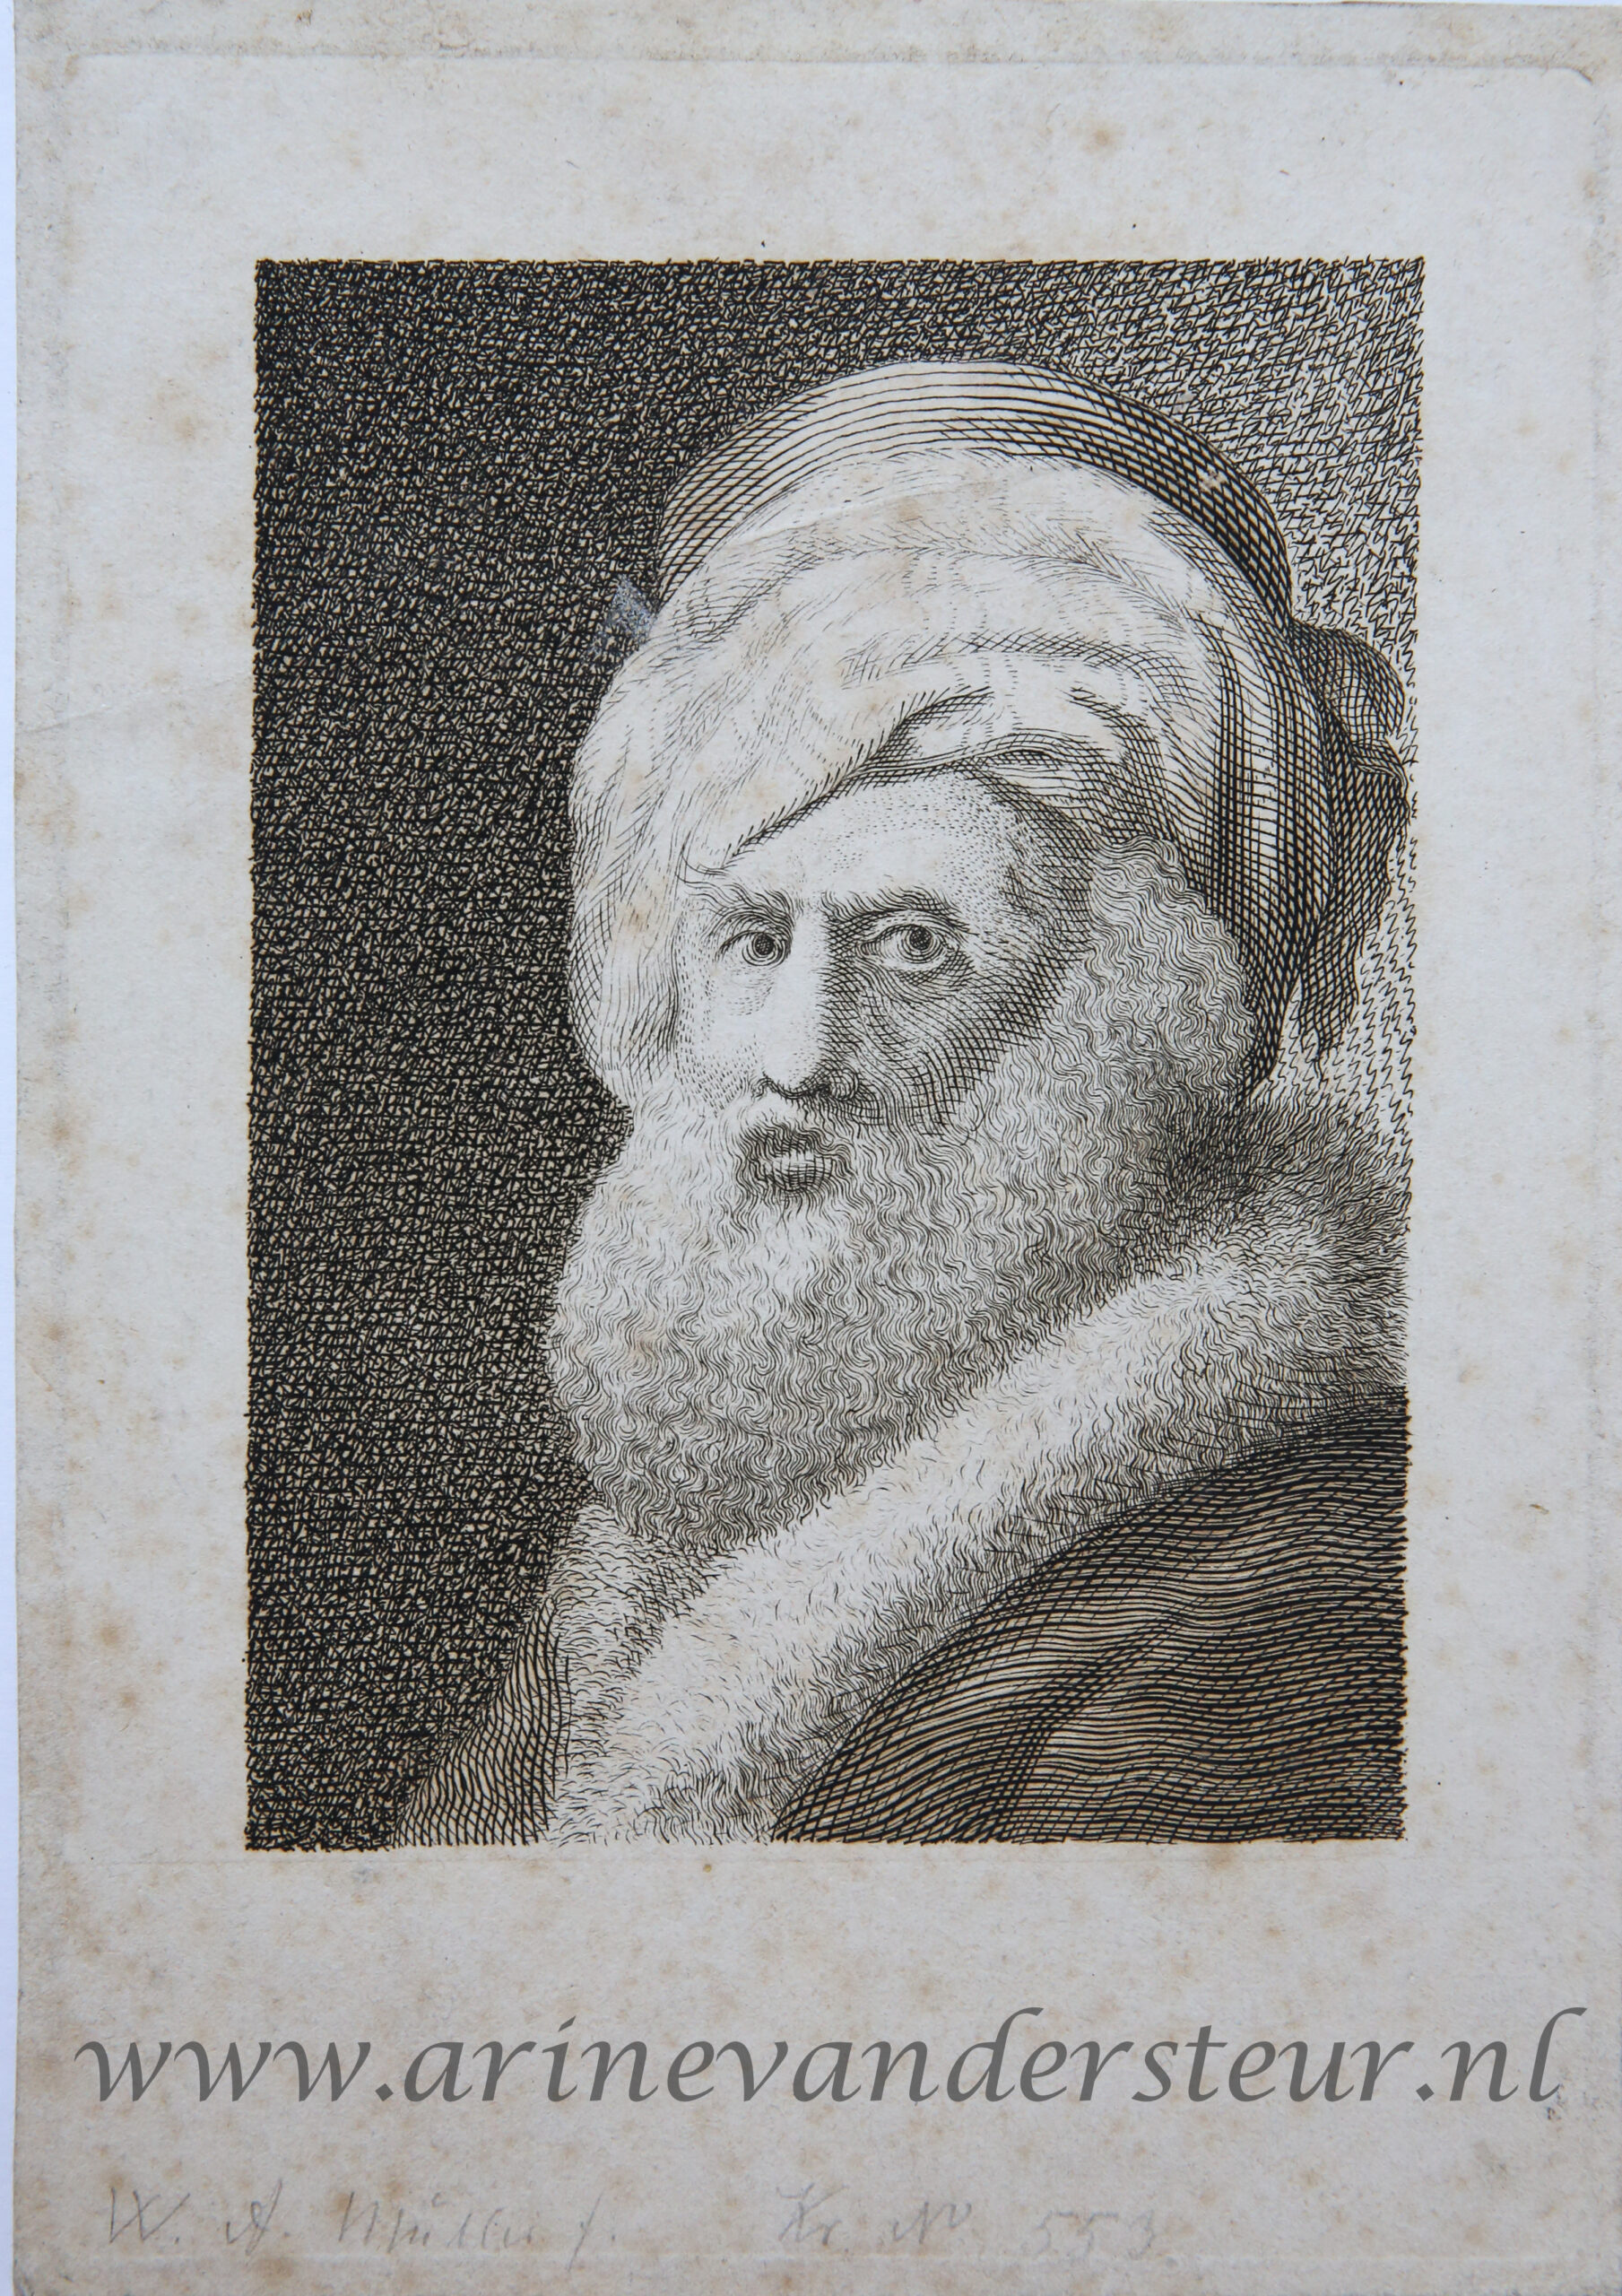 [Antique portrait print, engraving] Portrait of a bearded man with turban (bebaarde man met tulband), published ca. 1750.